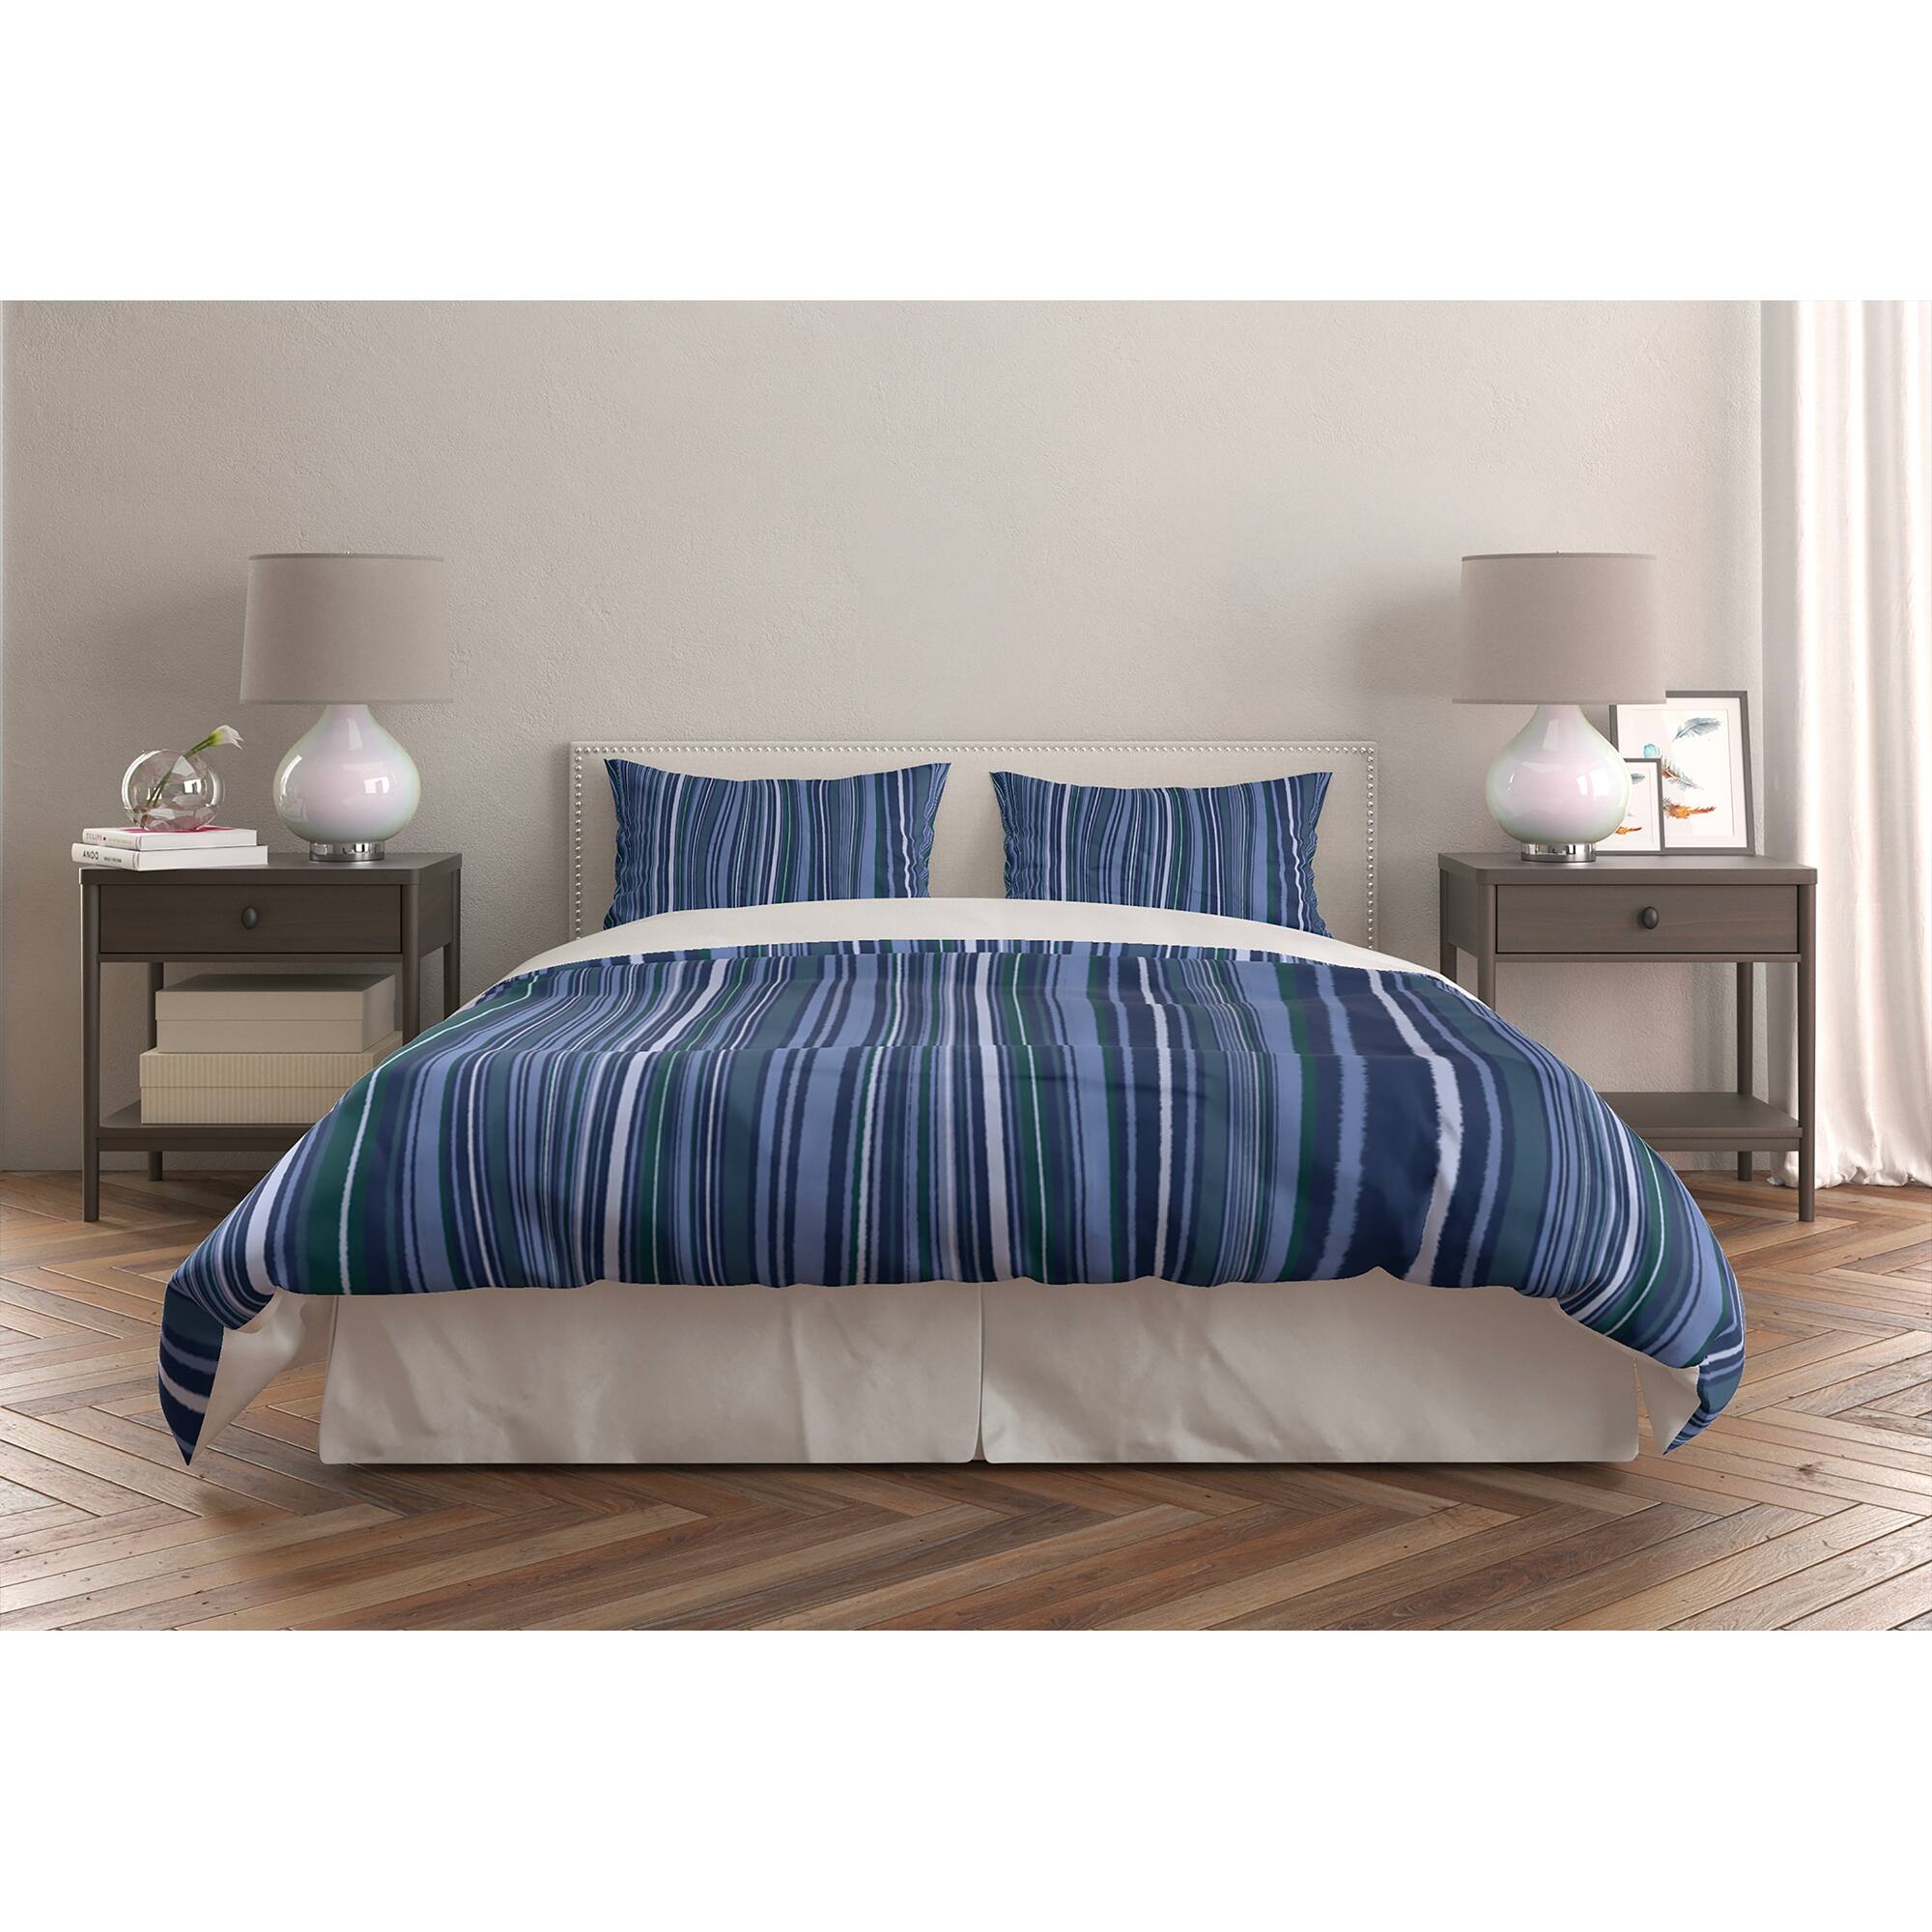 TO & FRO NAVY Comforter Set By Kavka Designs